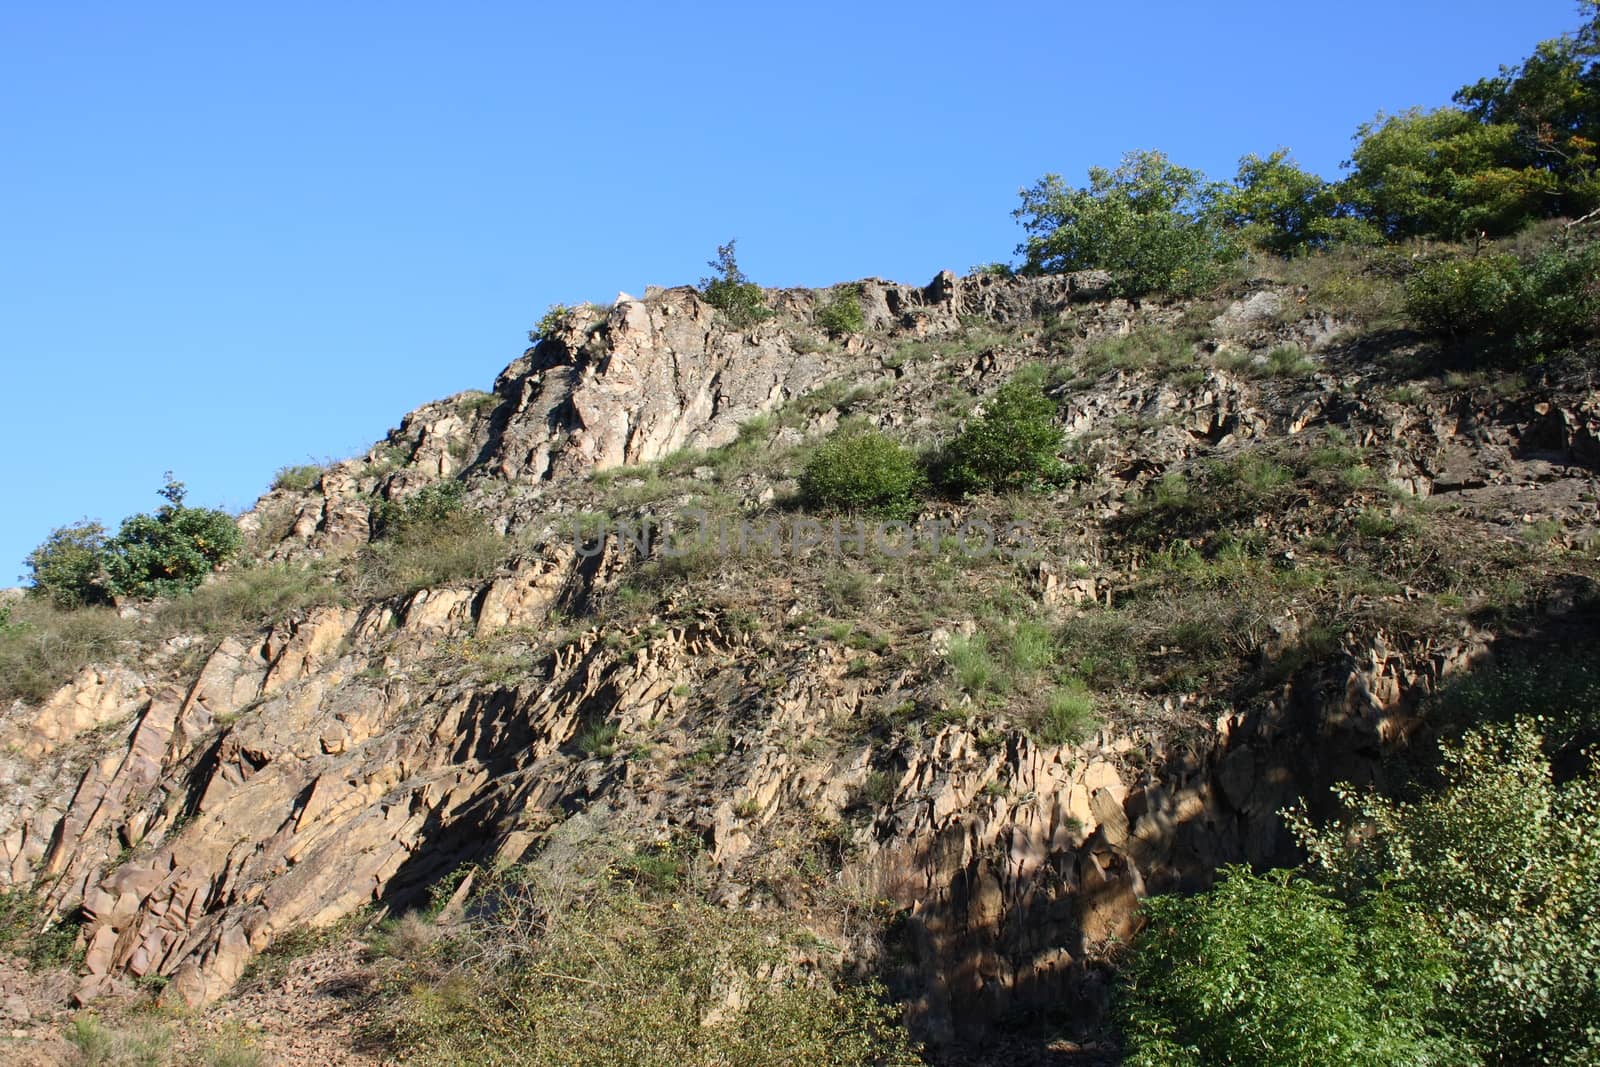 A landscape in the highlands, with rocks, trees and blue sky